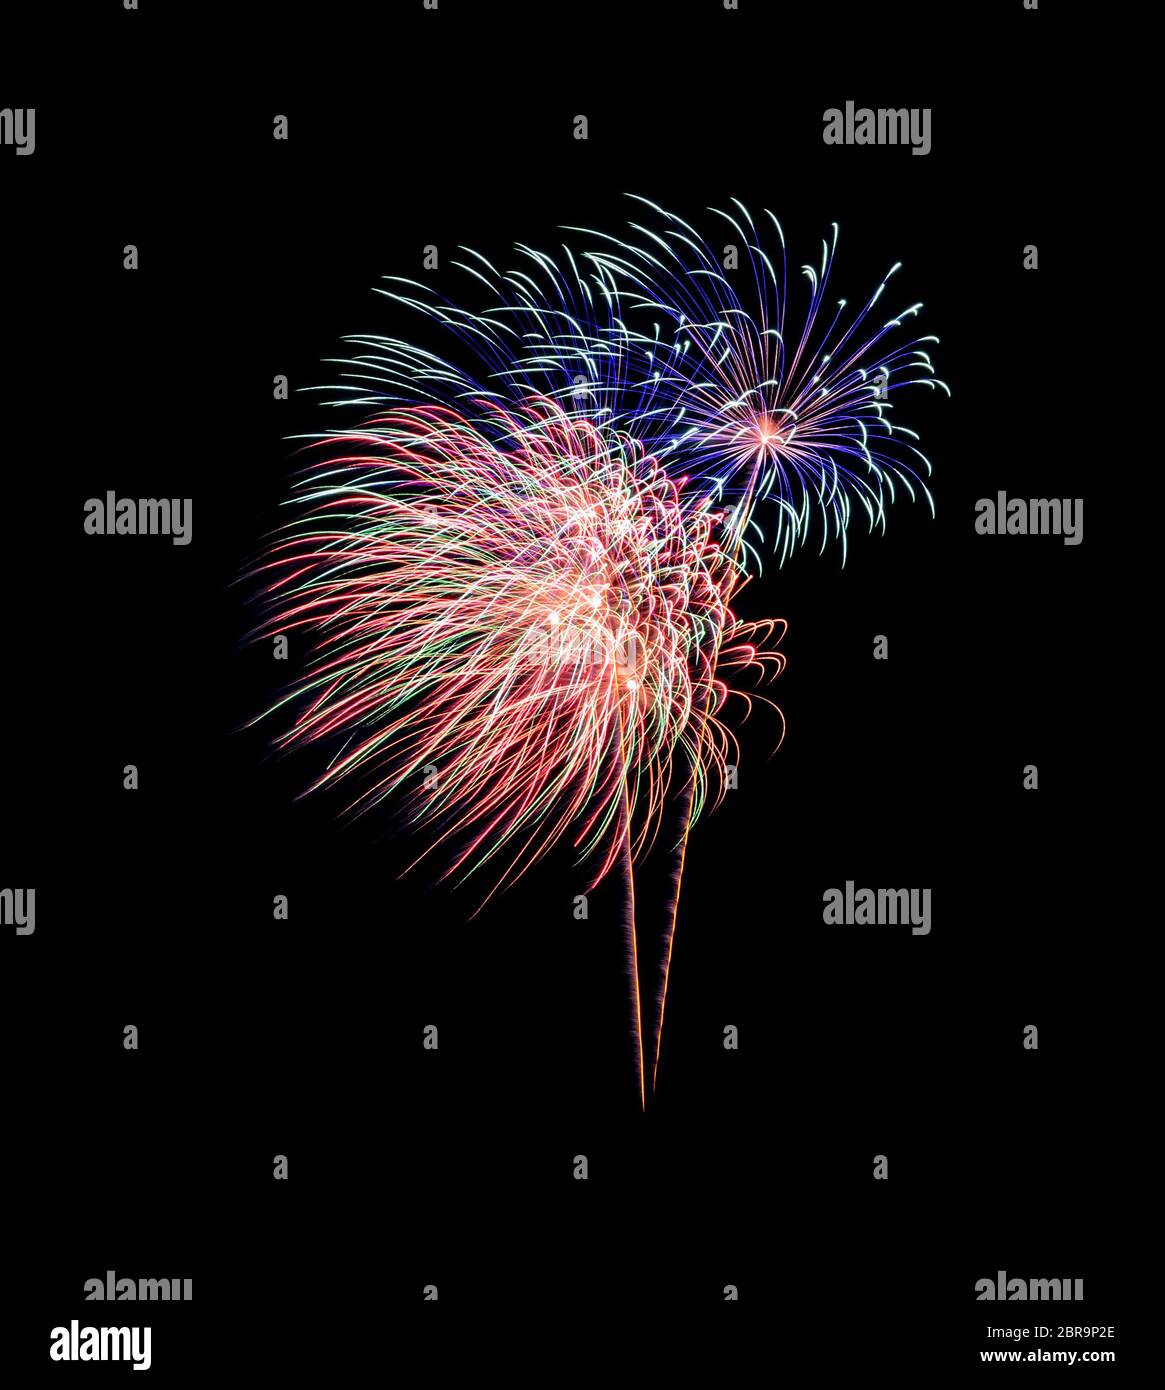 Colorful exploded fireworks display,  isolated on black background Stock Photo